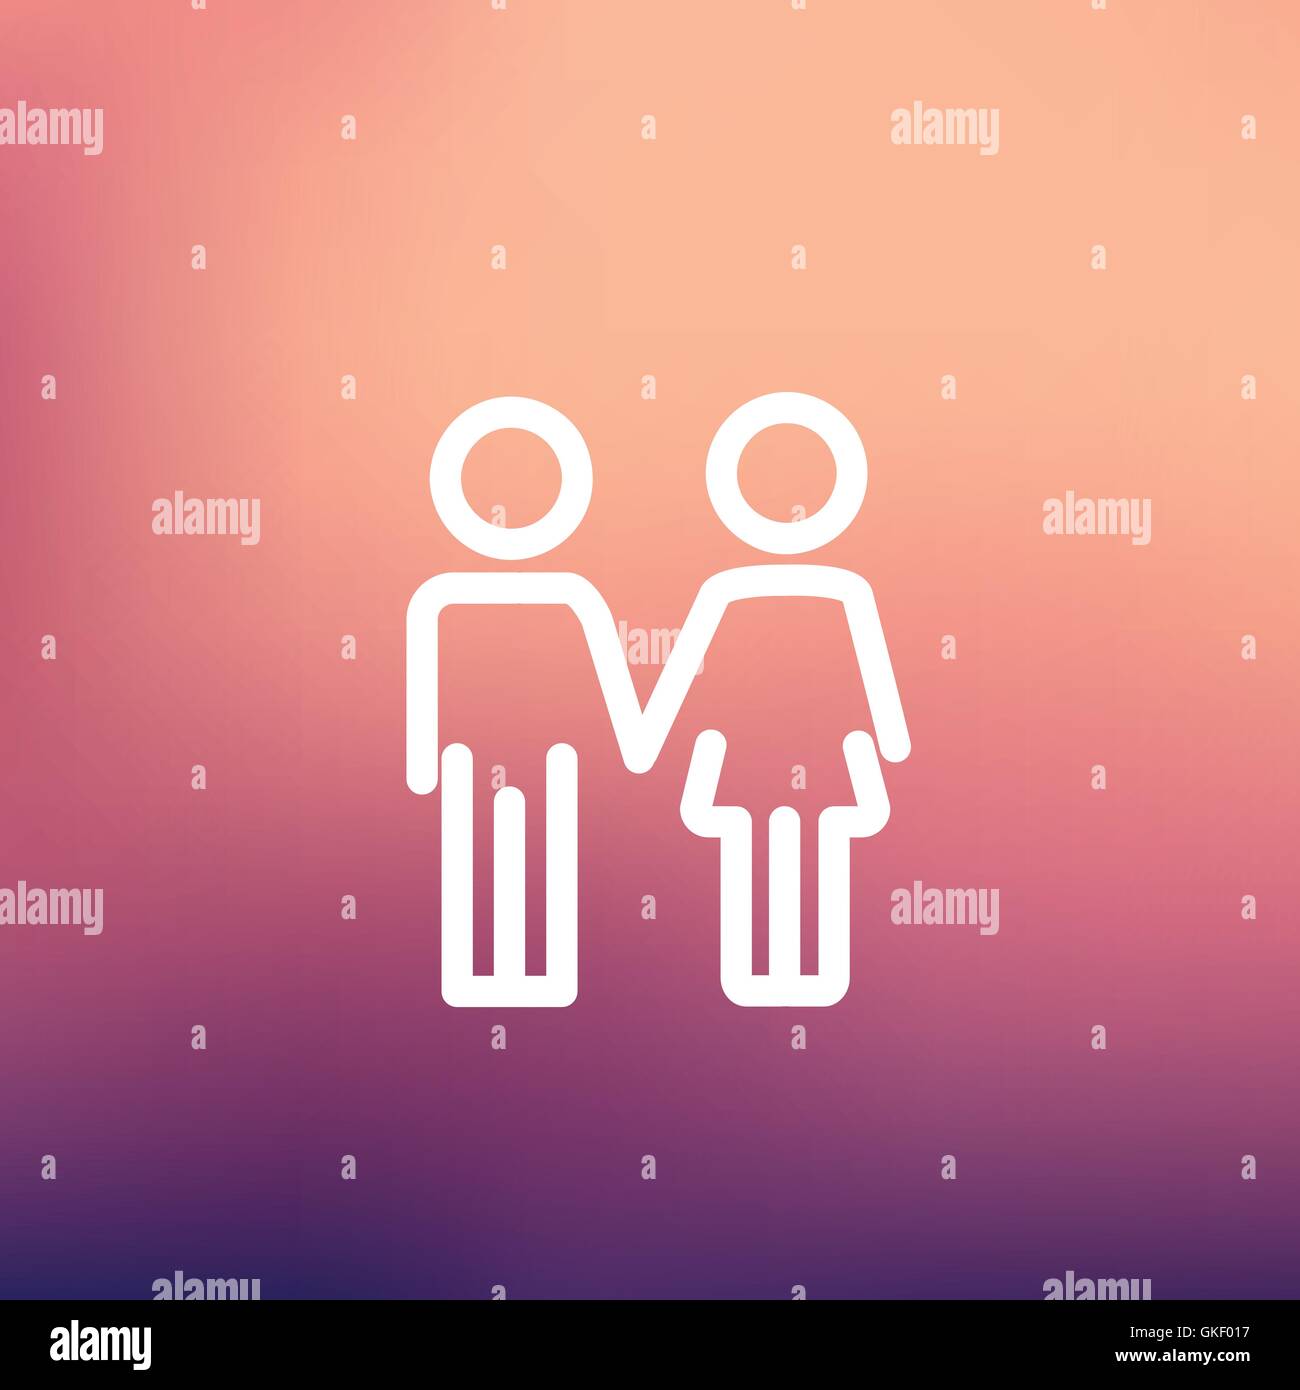 Little siblings thin line icon Stock Vector